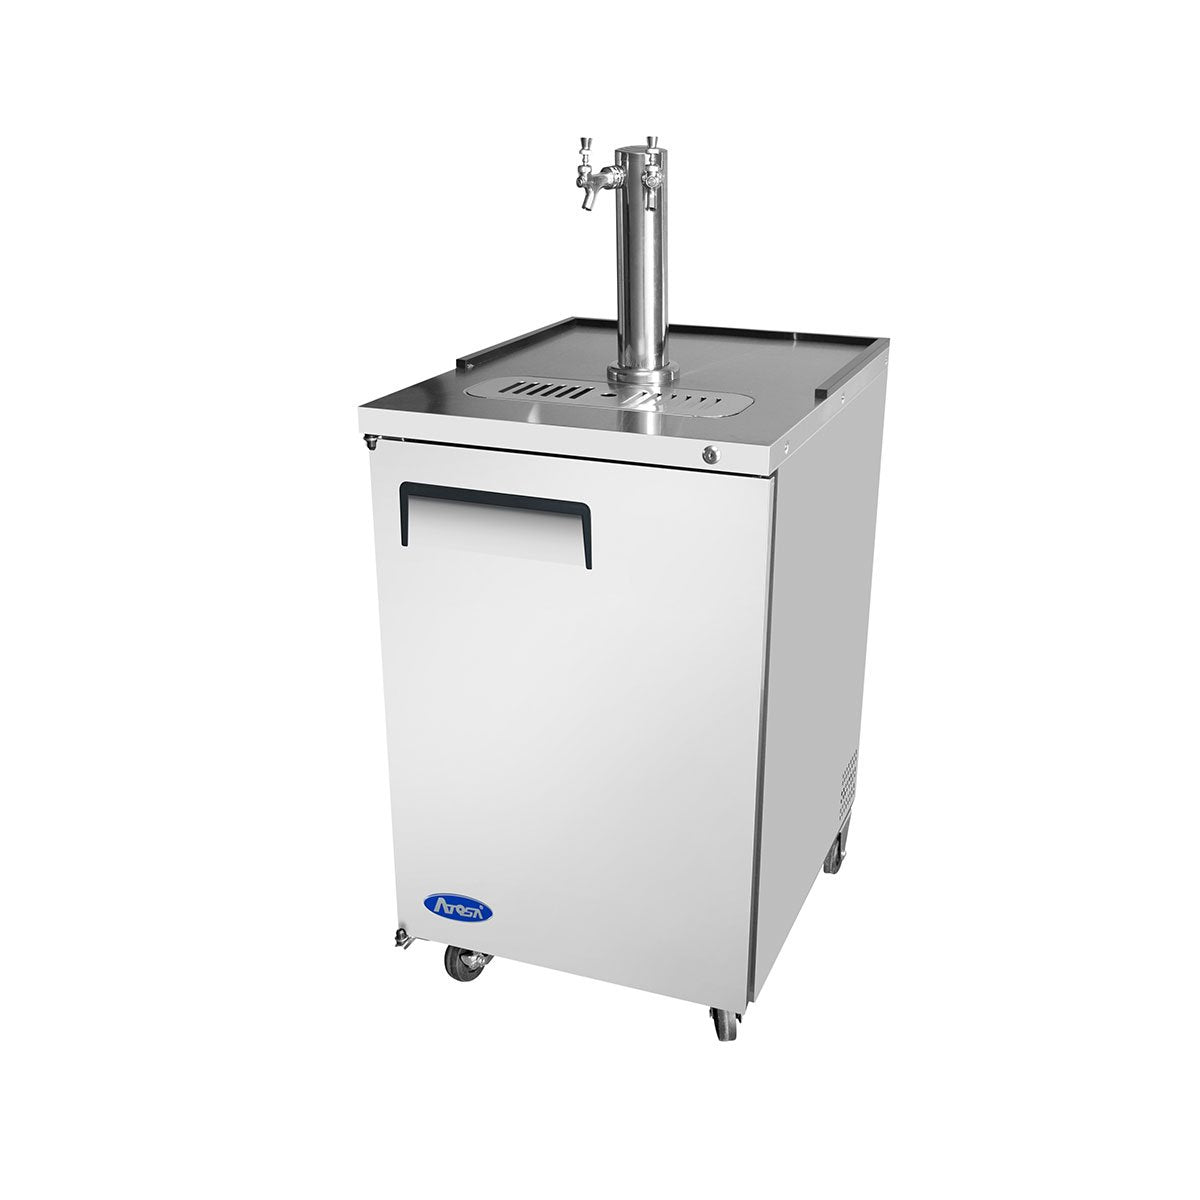 Atosa MKC23GR 23" Keg Cooler - Stainless Steel-with Dual Faucet Tower